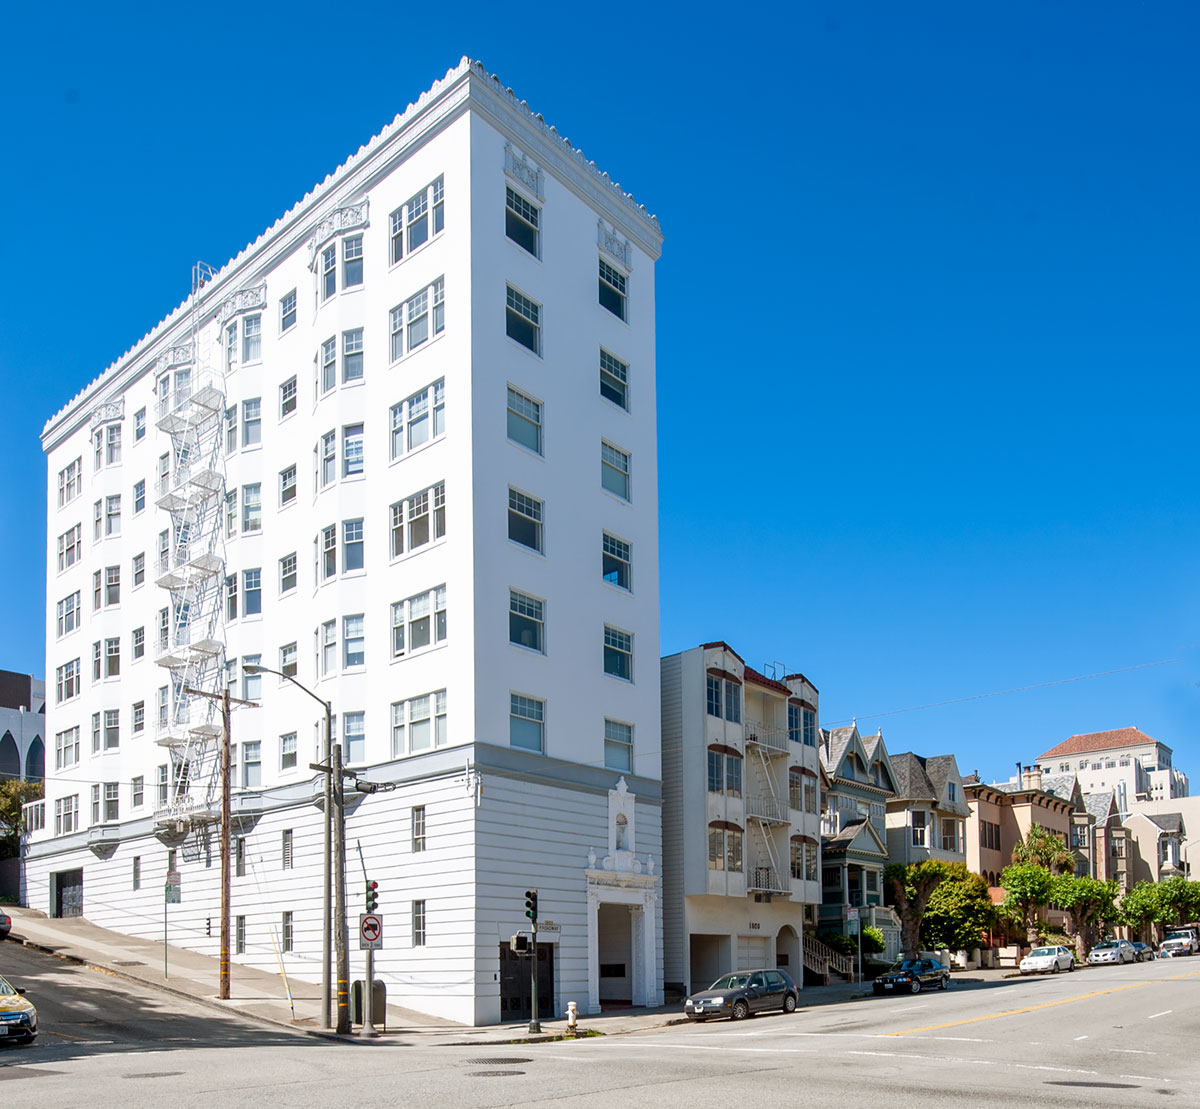 1801 Broadway in Pacific Heights, designed by H. C. Baumann, built 1931